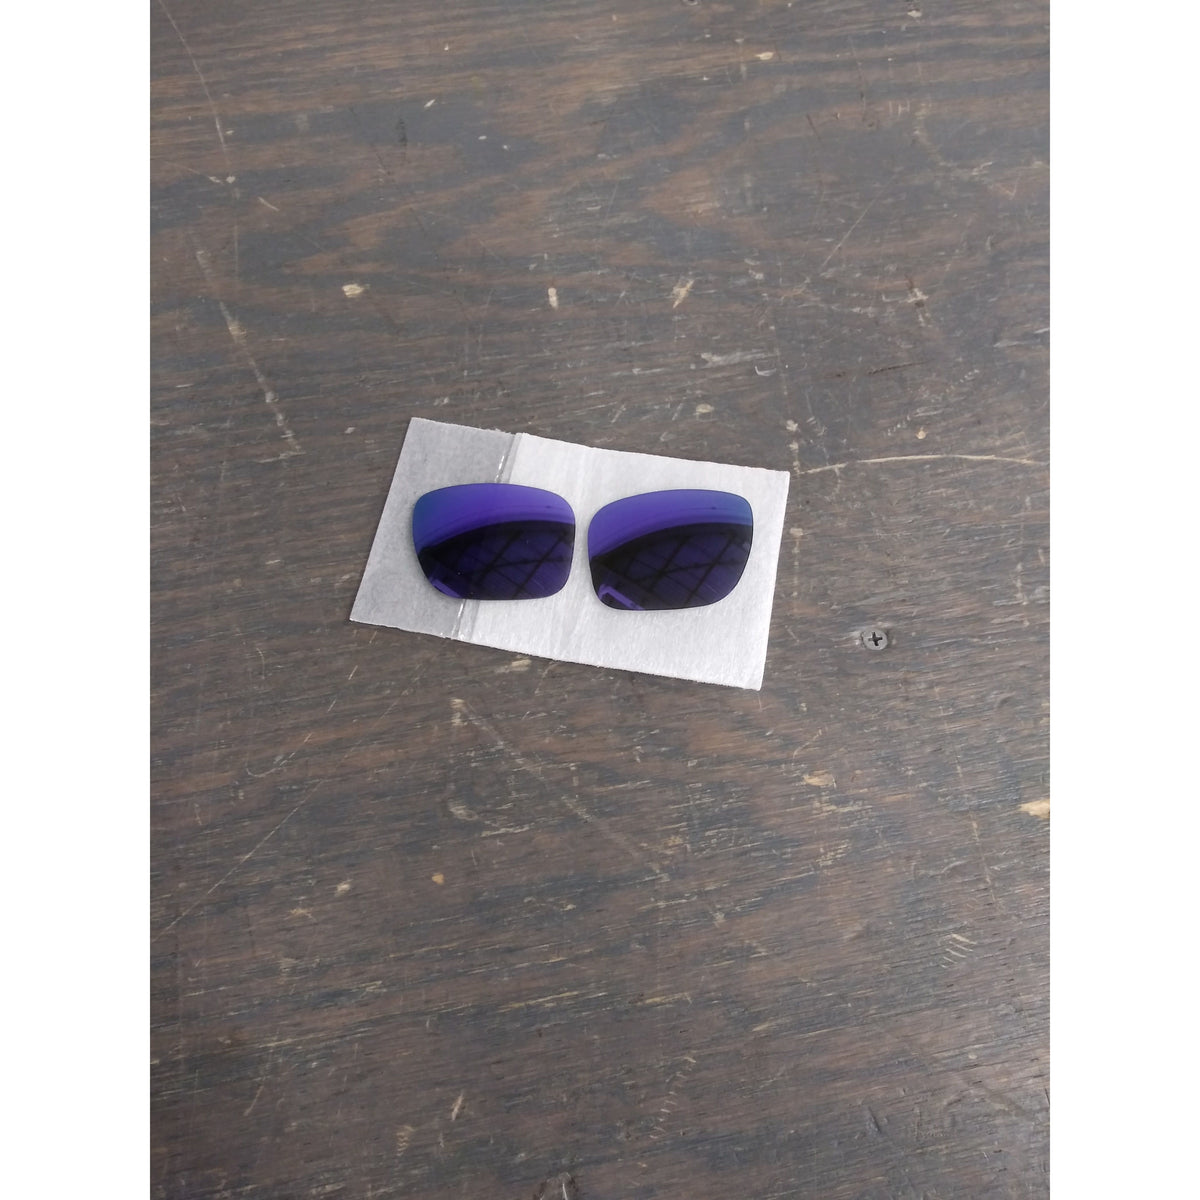 Oakley Holbrook Replacement Lenses - Violet Irid - Used - Acceptable